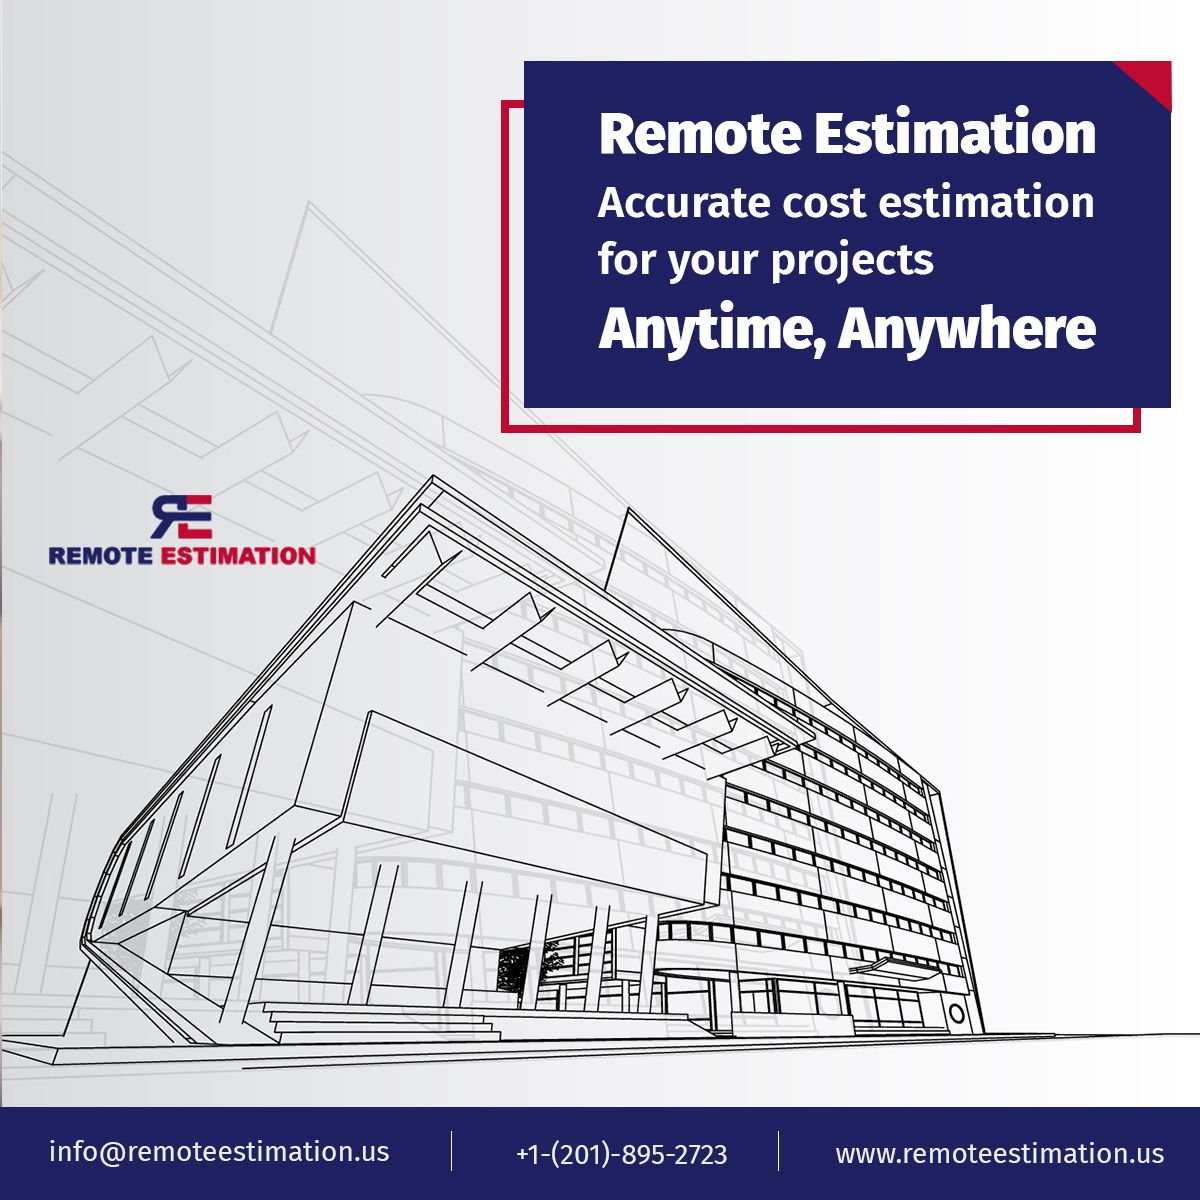 Visit our website at remoteestimation.us to learn more and get started with our estimation services today. #RemoteEstimation #ProjectEstimation #RemoteWork #CostEstimation #generalcontractors